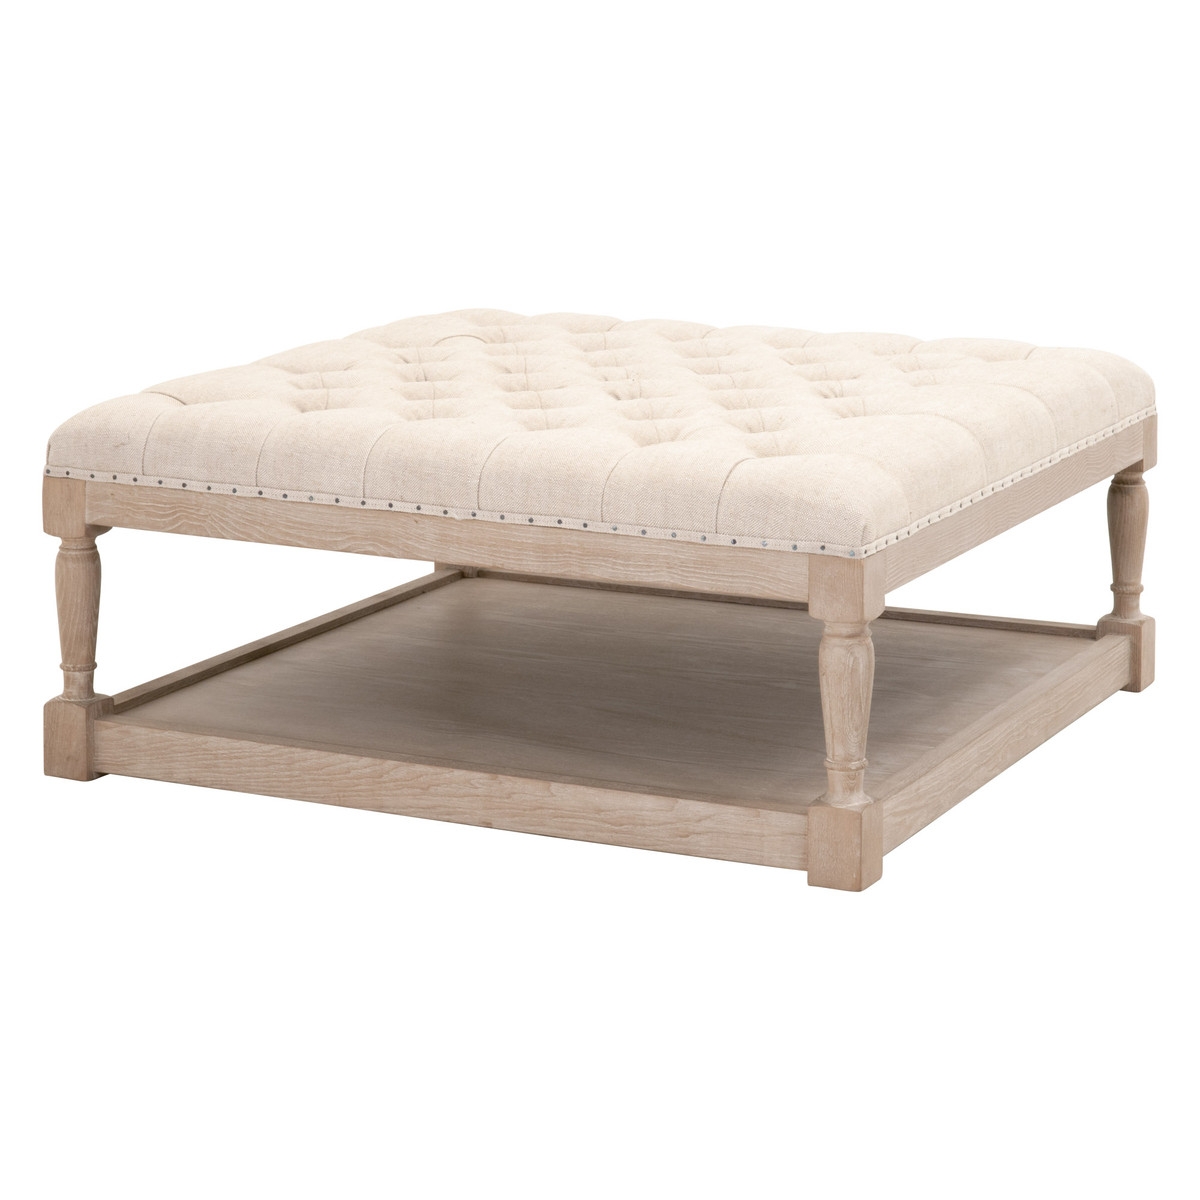 Townsend Tufted Upholstered Coffee Table, Bisque French Linen - Image 1